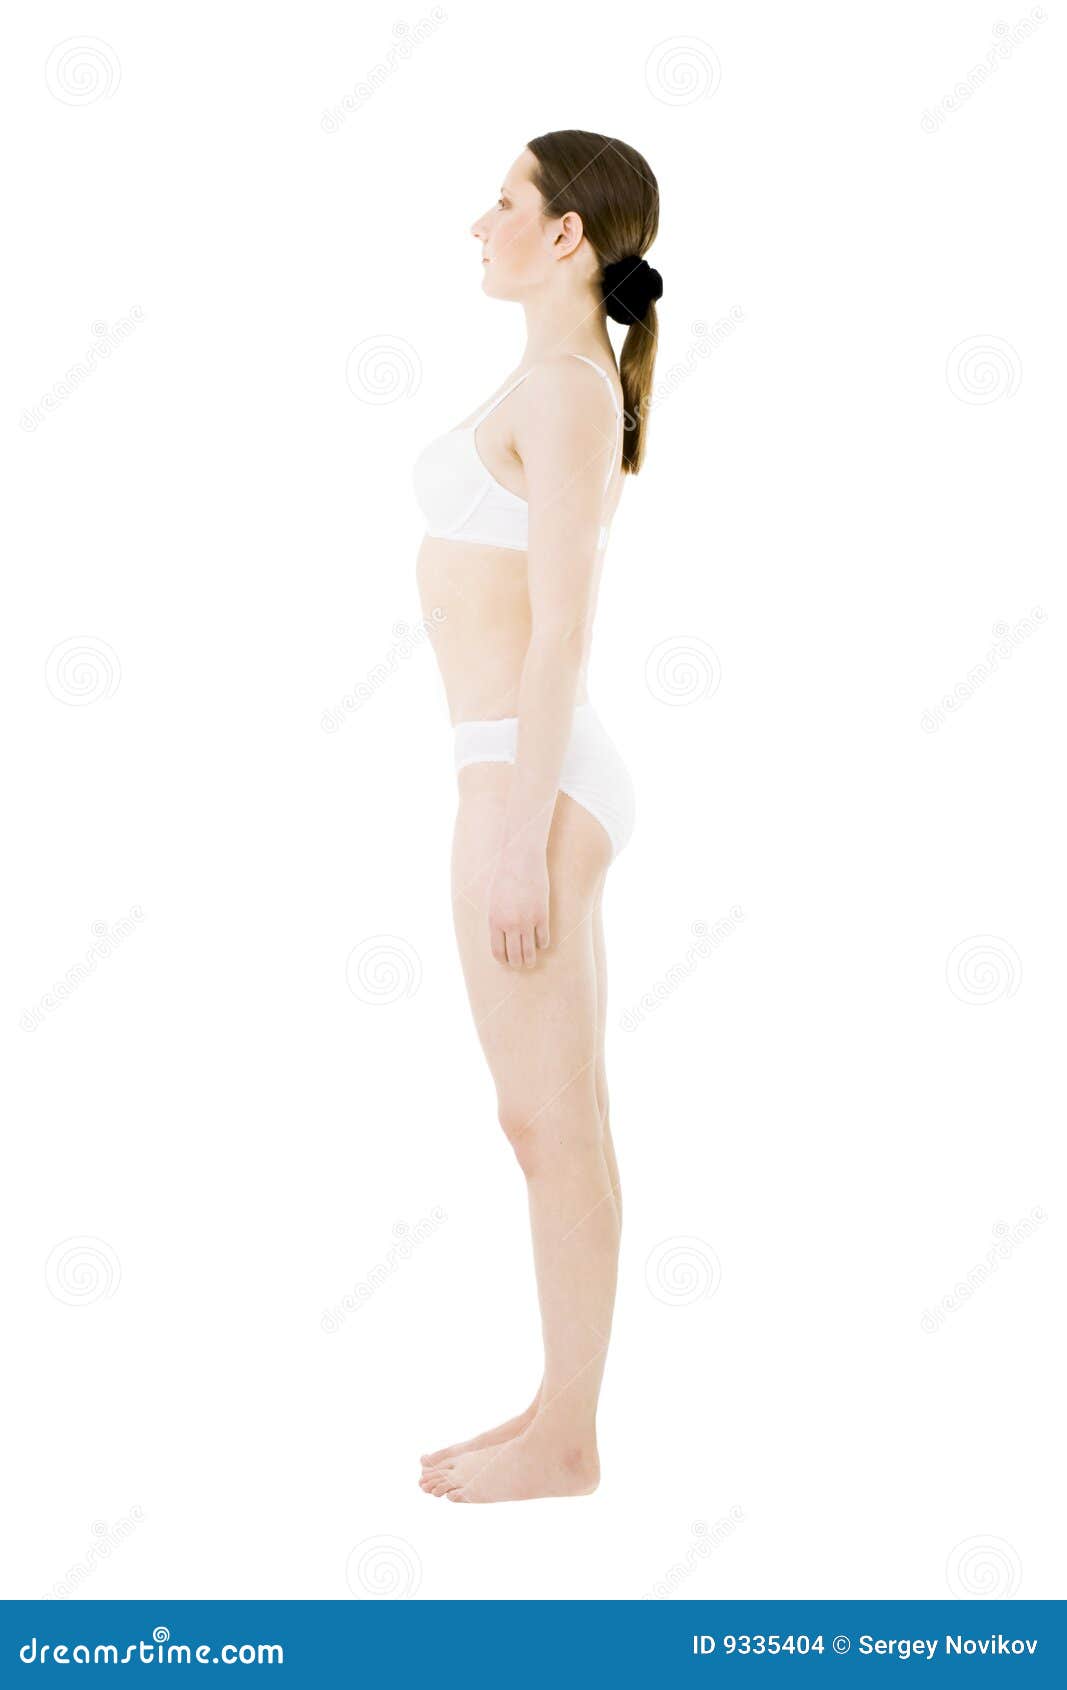 Photo about One woman standing in generic white uderwear isolated standing ...